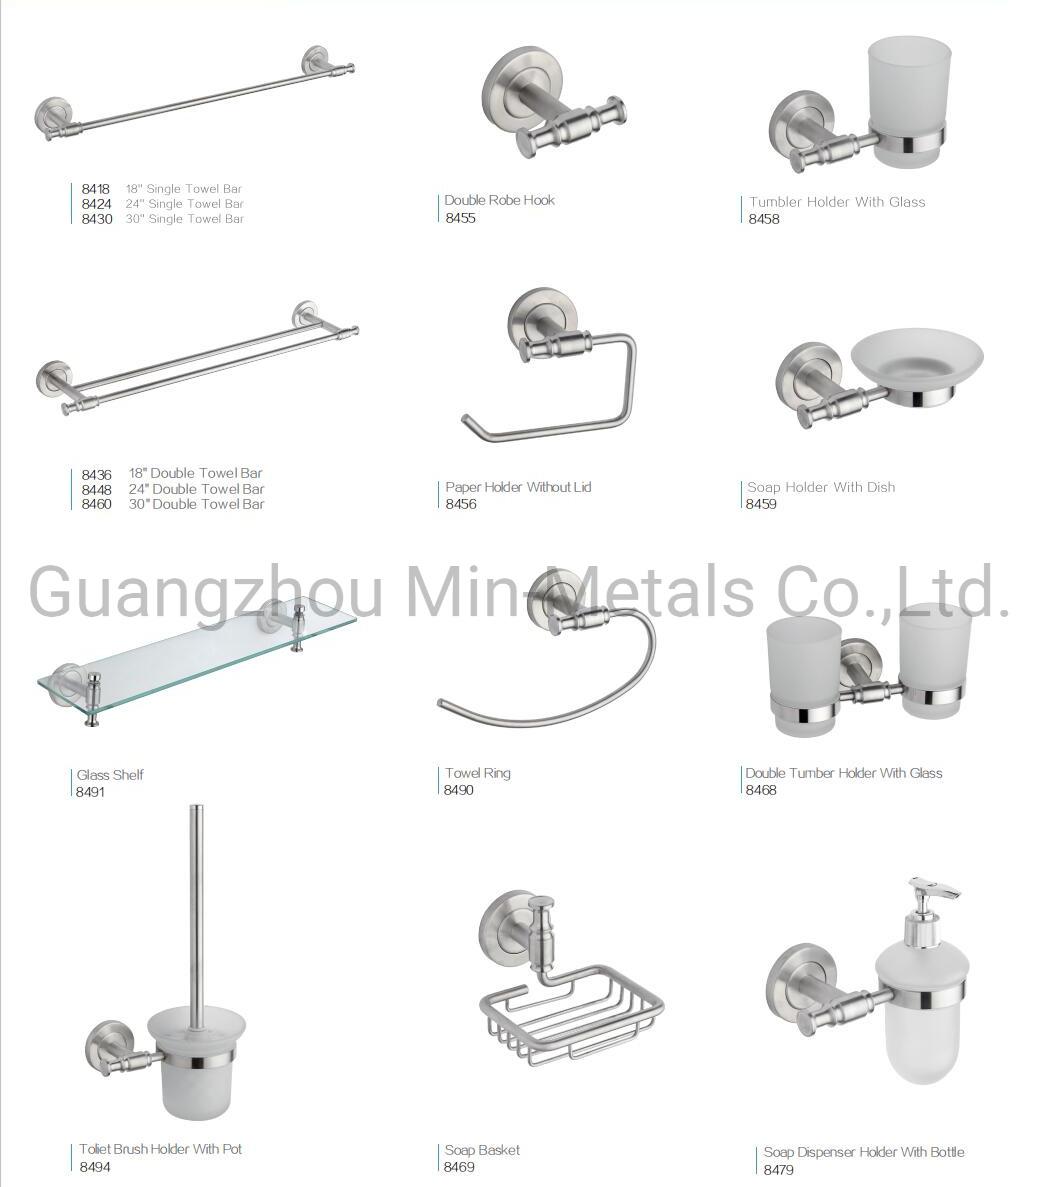 S. S Sanitary Wares Bathroom Accessories Set with High Quality Mx-8400